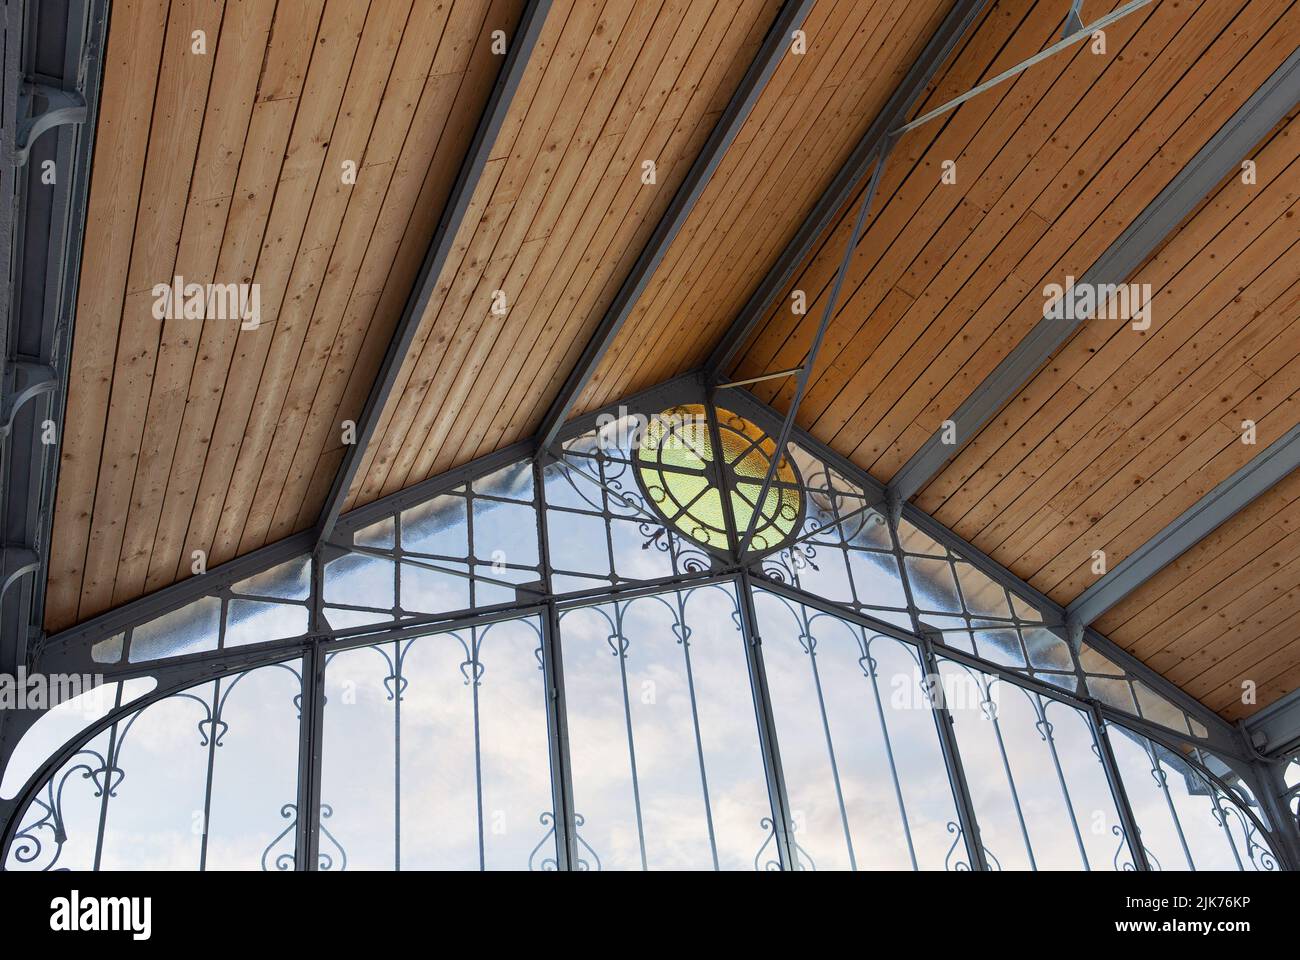 Wooden ceiling and canopy in a covered market Stock Photo